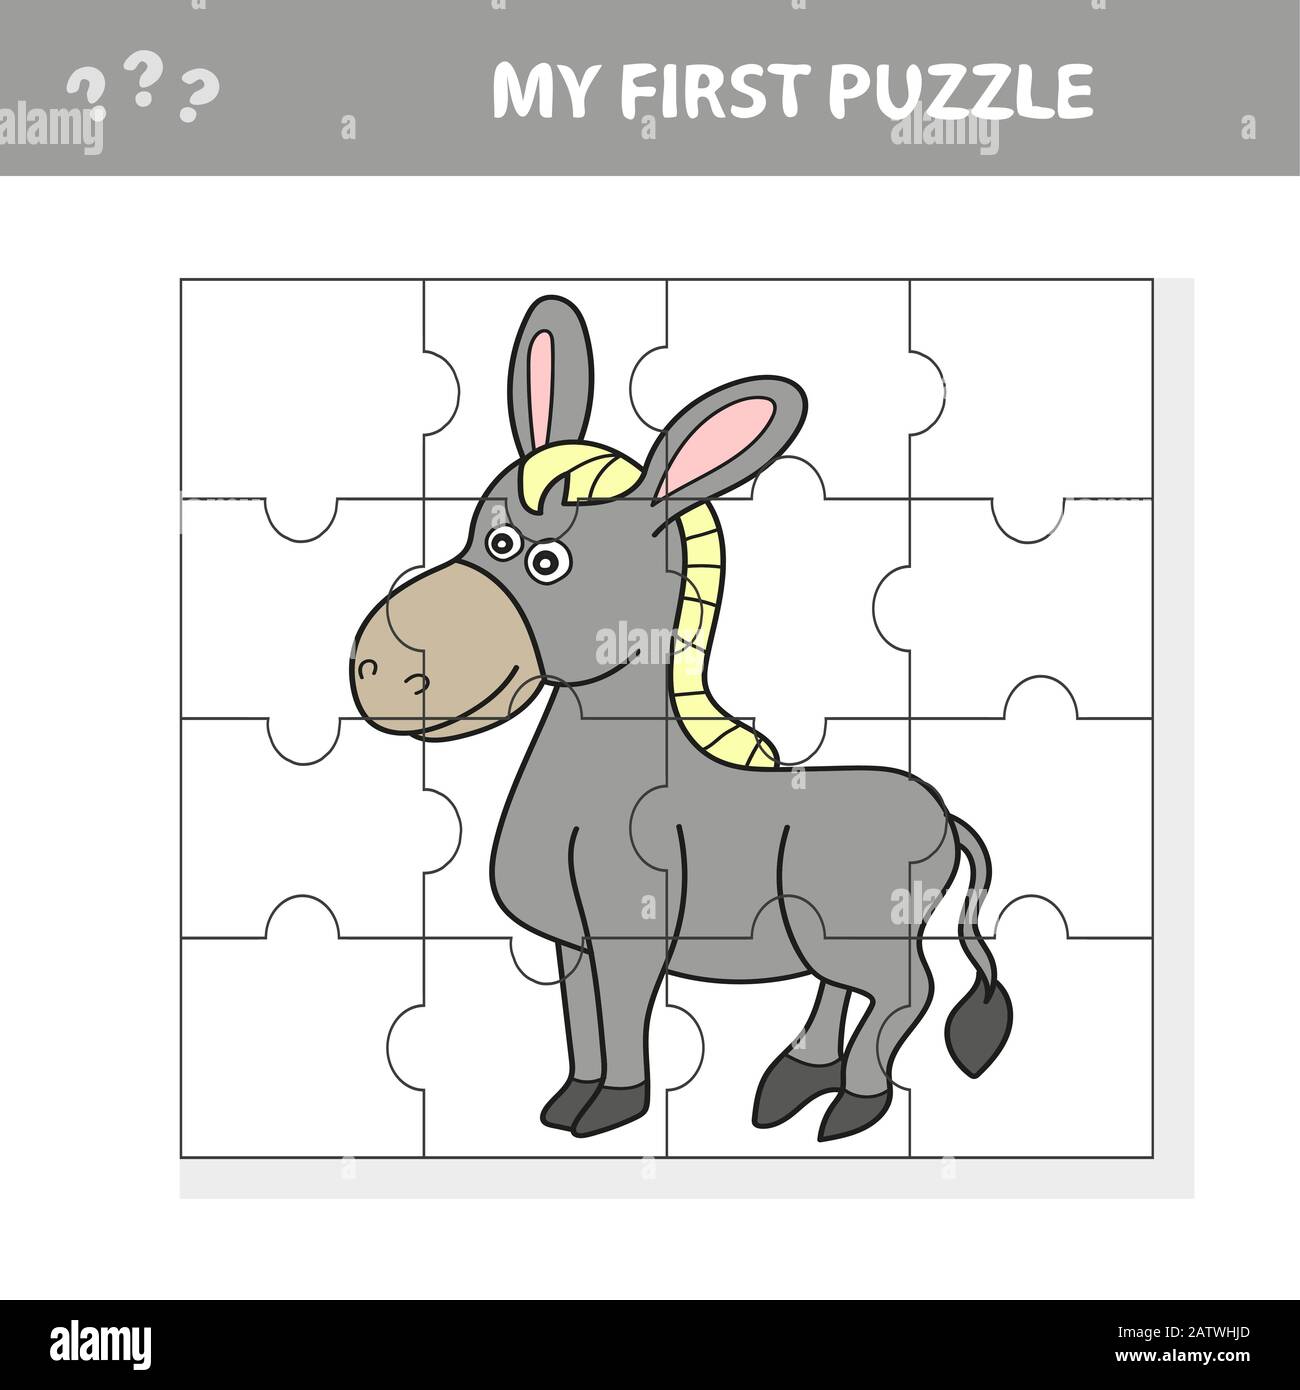 https://c8.alamy.com/comp/2ATWHJD/cartoon-vector-illustration-of-education-jigsaw-puzzle-game-for-preschool-children-with-funny-donkey-farm-animal-my-first-puzzle-2ATWHJD.jpg